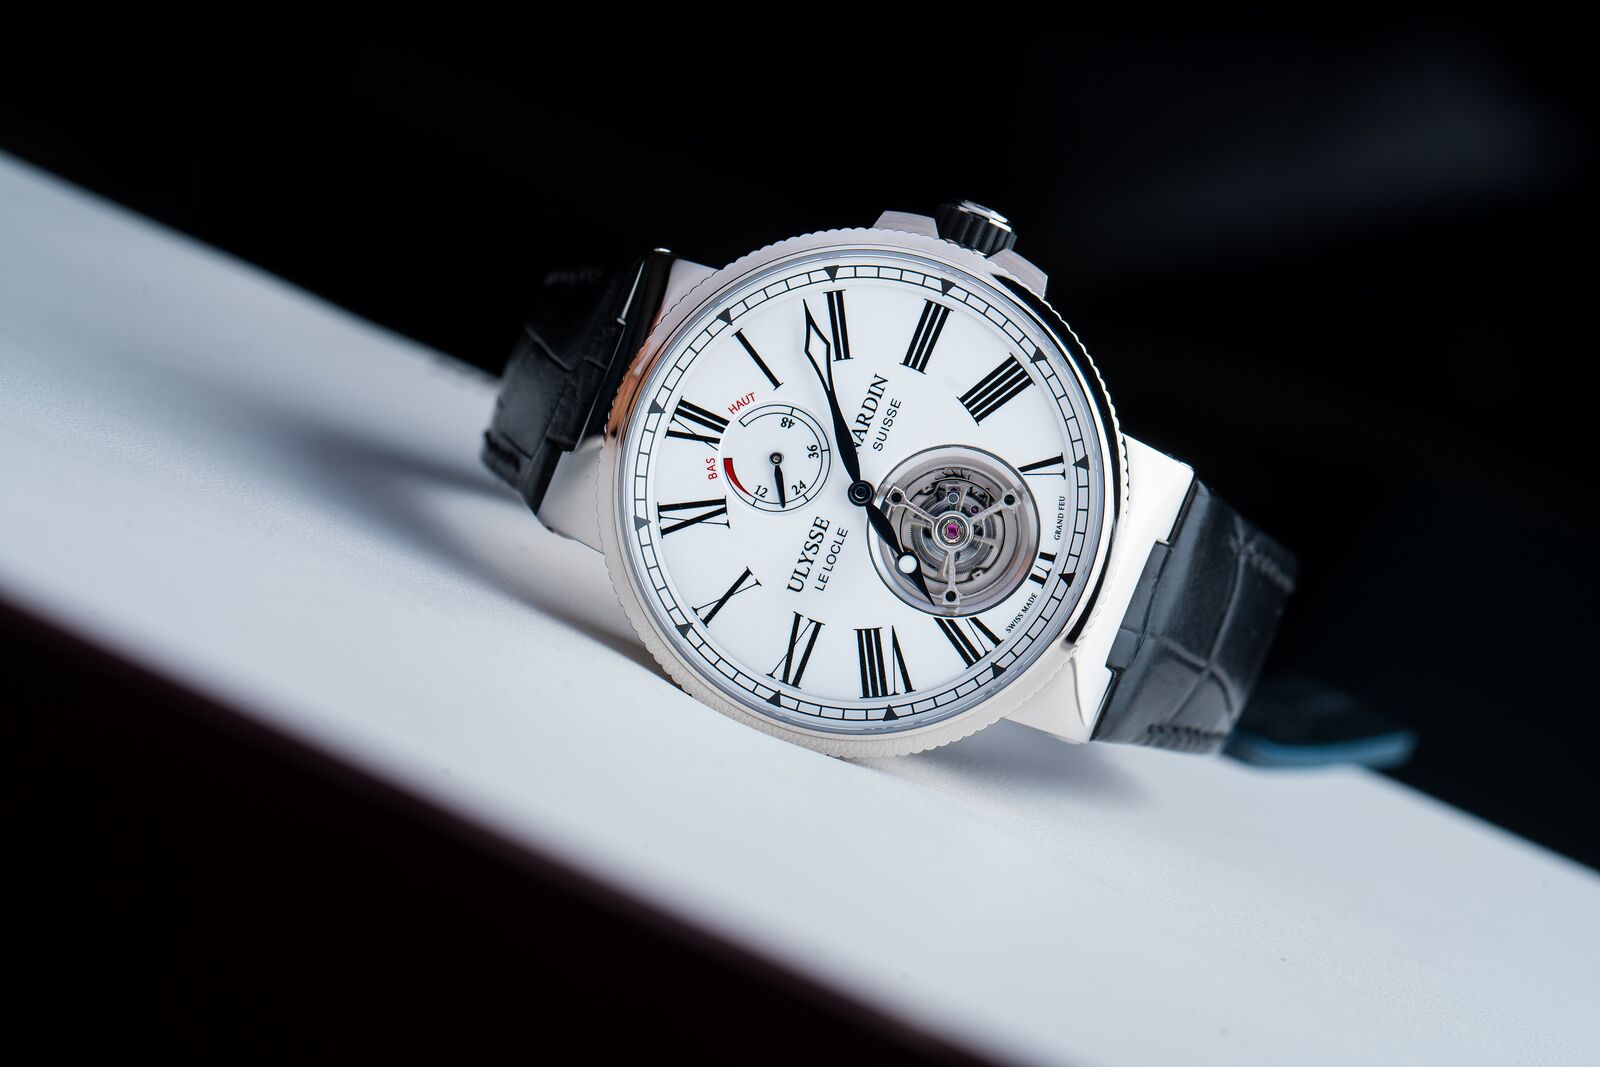 Ulysse Nardin and the Art of a “simple” Tourbillon